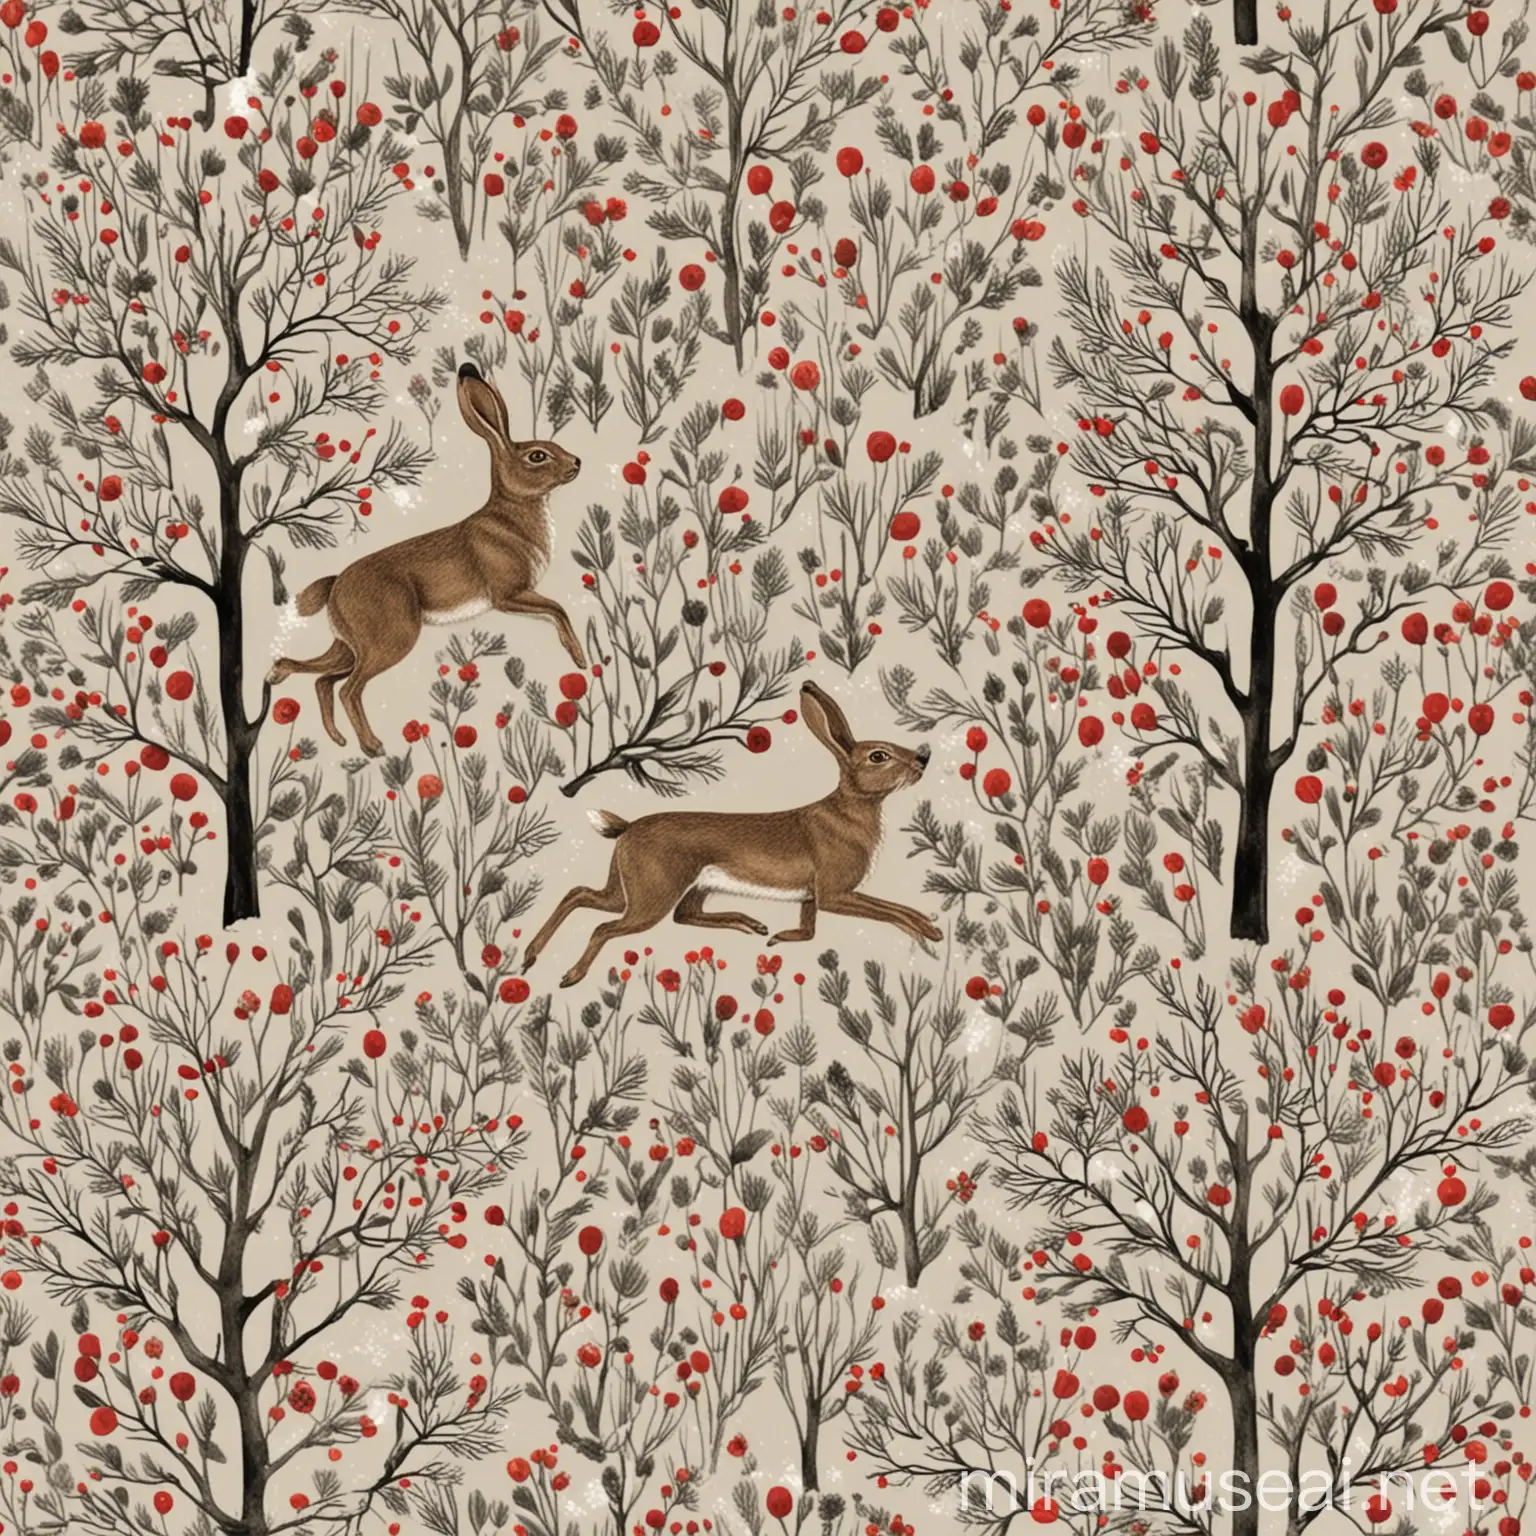 Hare design on a natural / grey base (ref the Dog design AC241990) and then have a repeating Hare pattern. I really like the trees with snow and the red berries with pine branch add a pop of colour